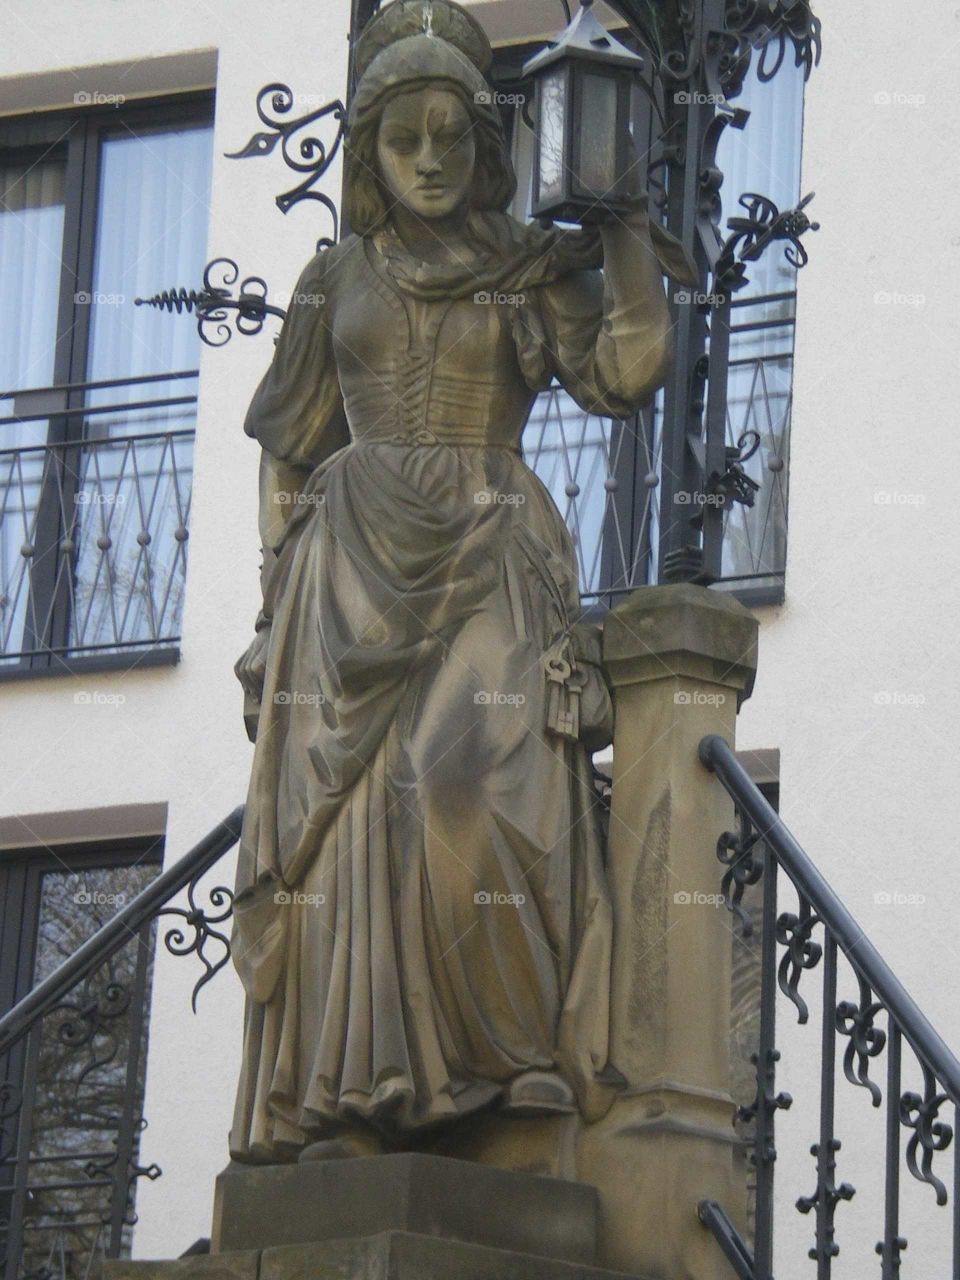 Statue in Cologne, Germany